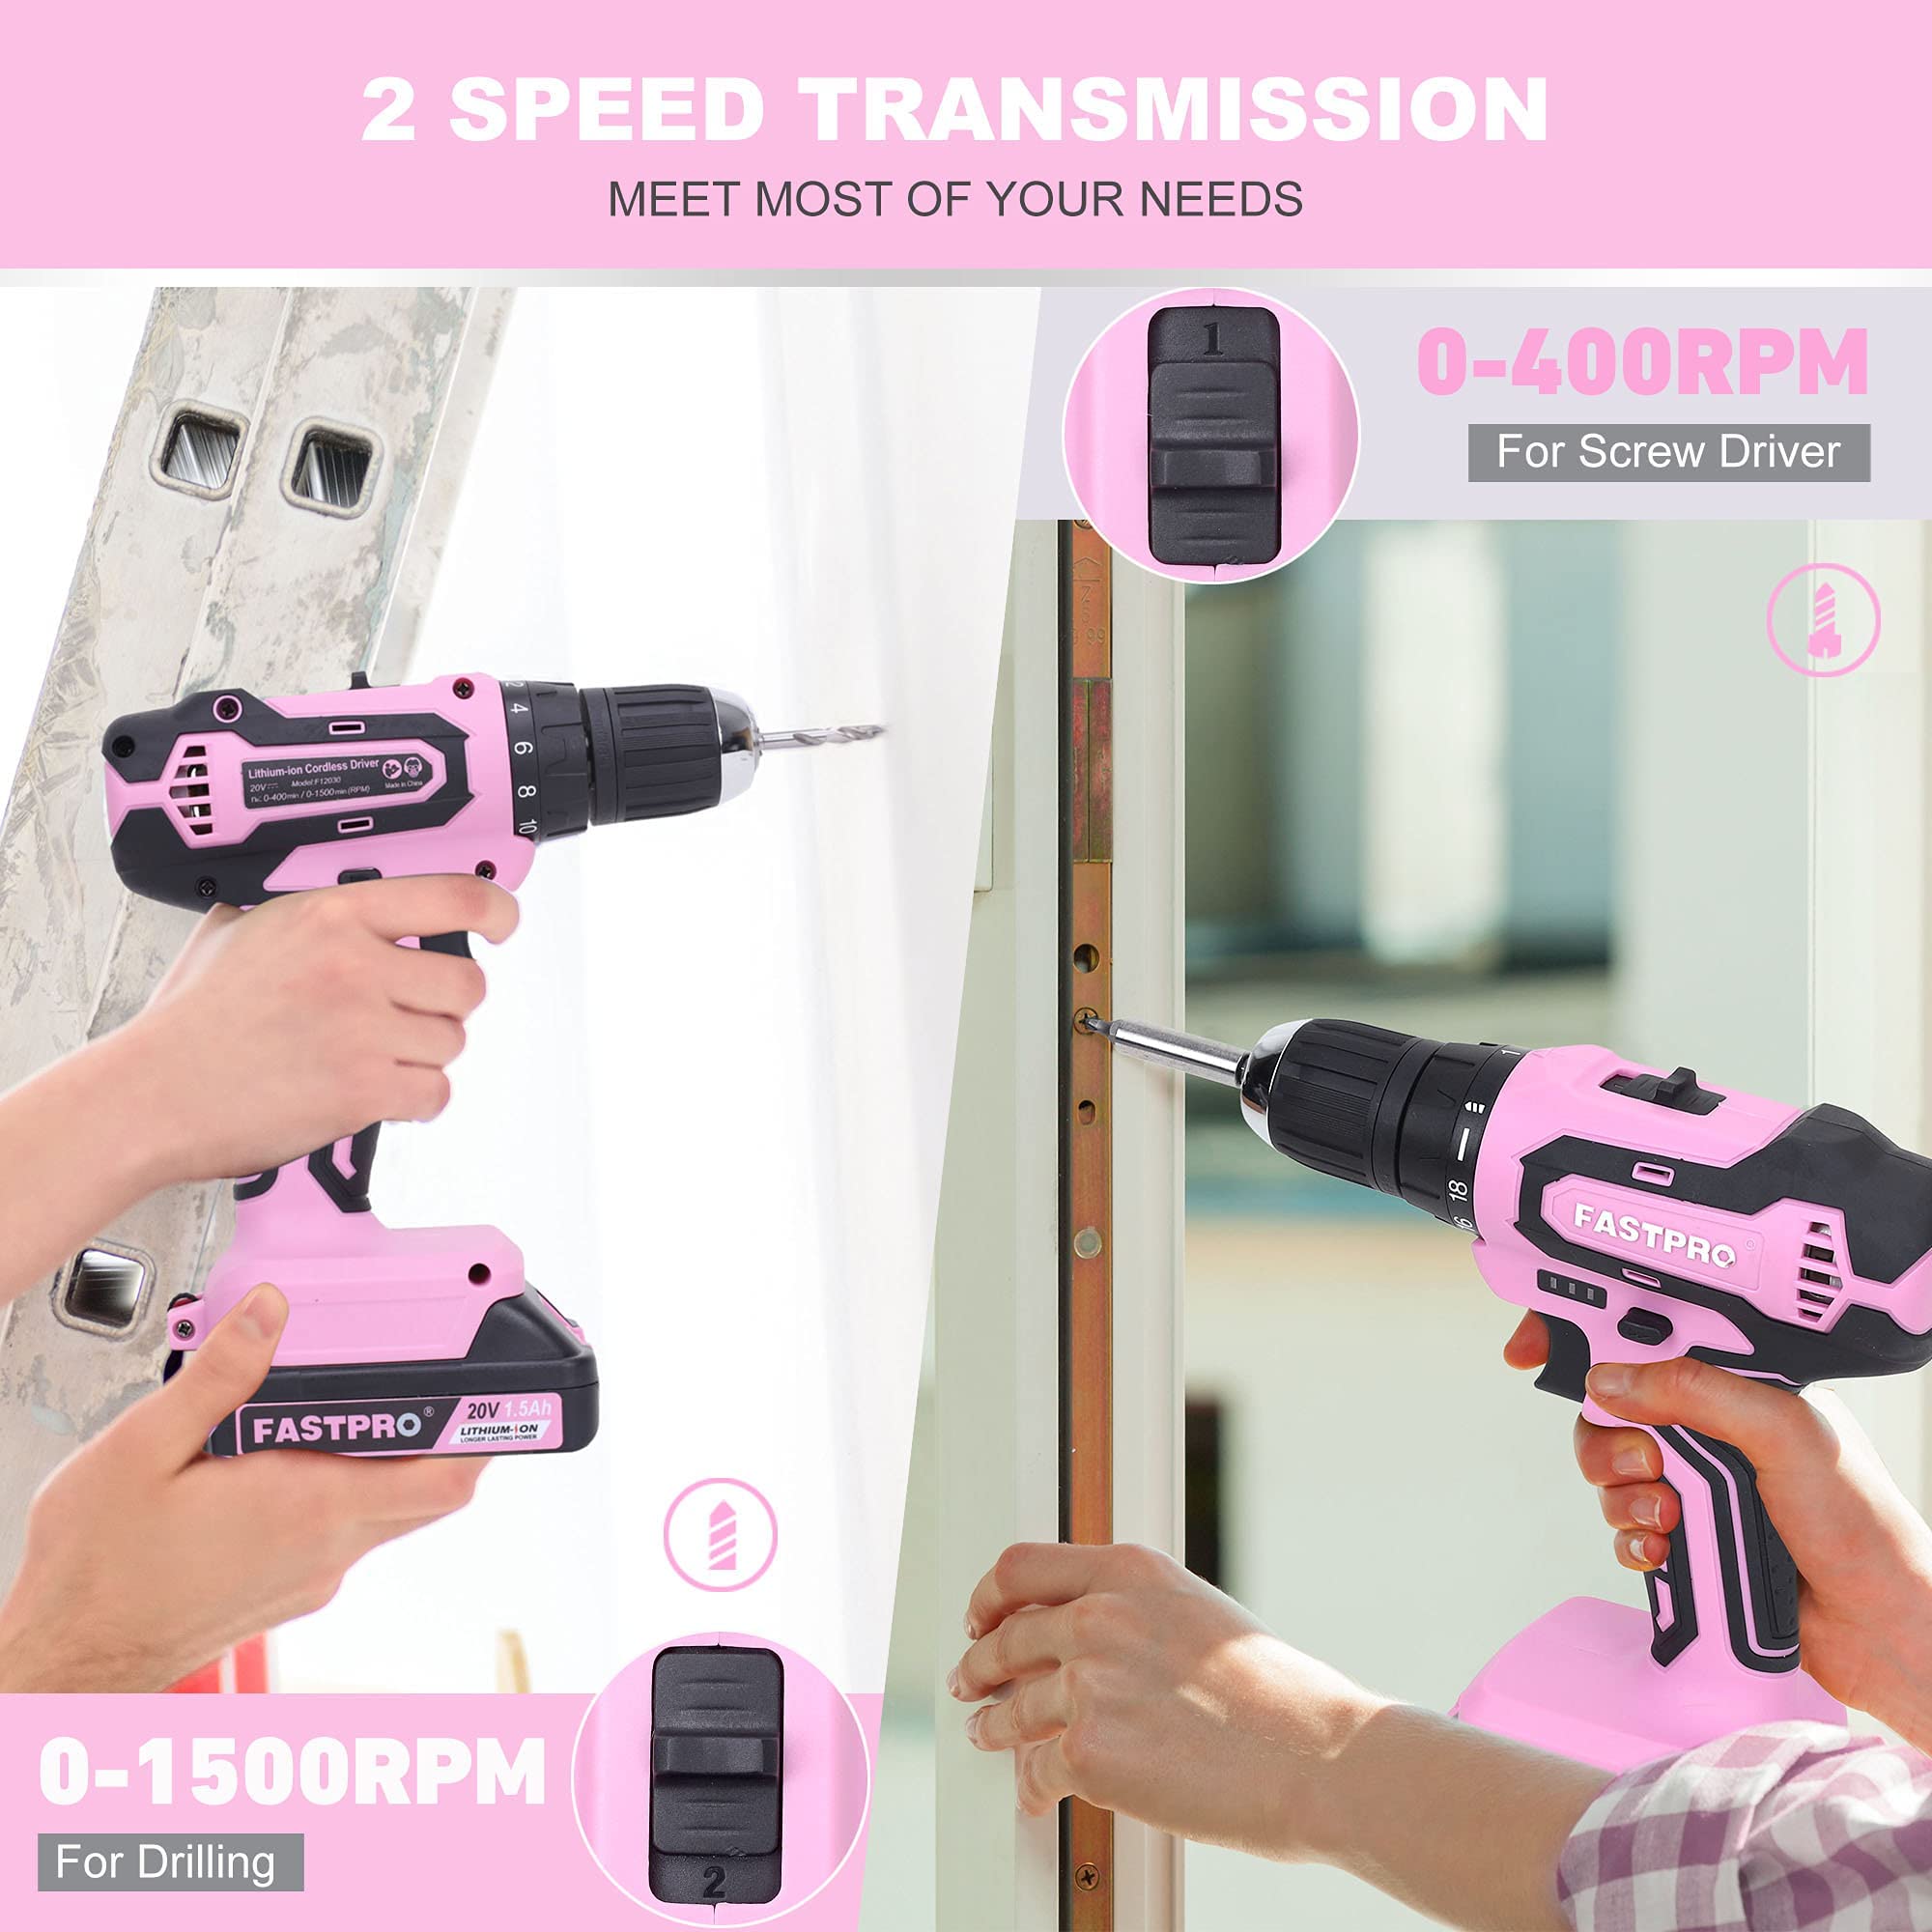 FASTPRO 232-Piece 20V Pink Cordless Lithium-ion Drill Driver and Home Tool Set